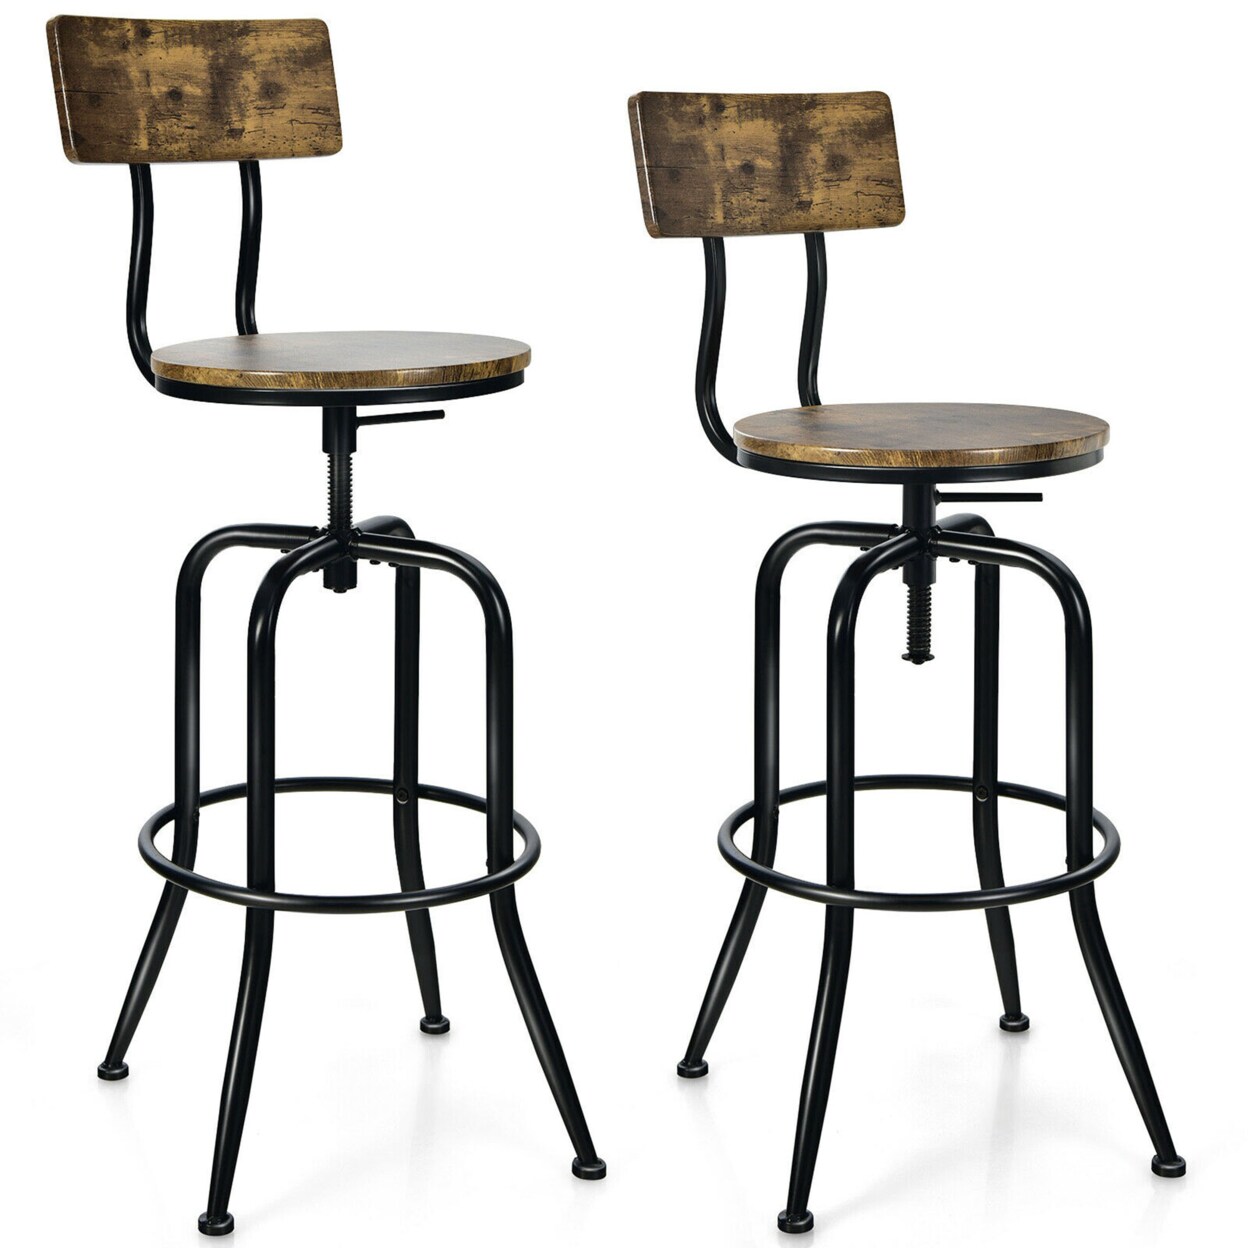 Gymax Set of 2 Industrial Bar Stool Adjustable Swivel Counter-Height Dining Side Chair